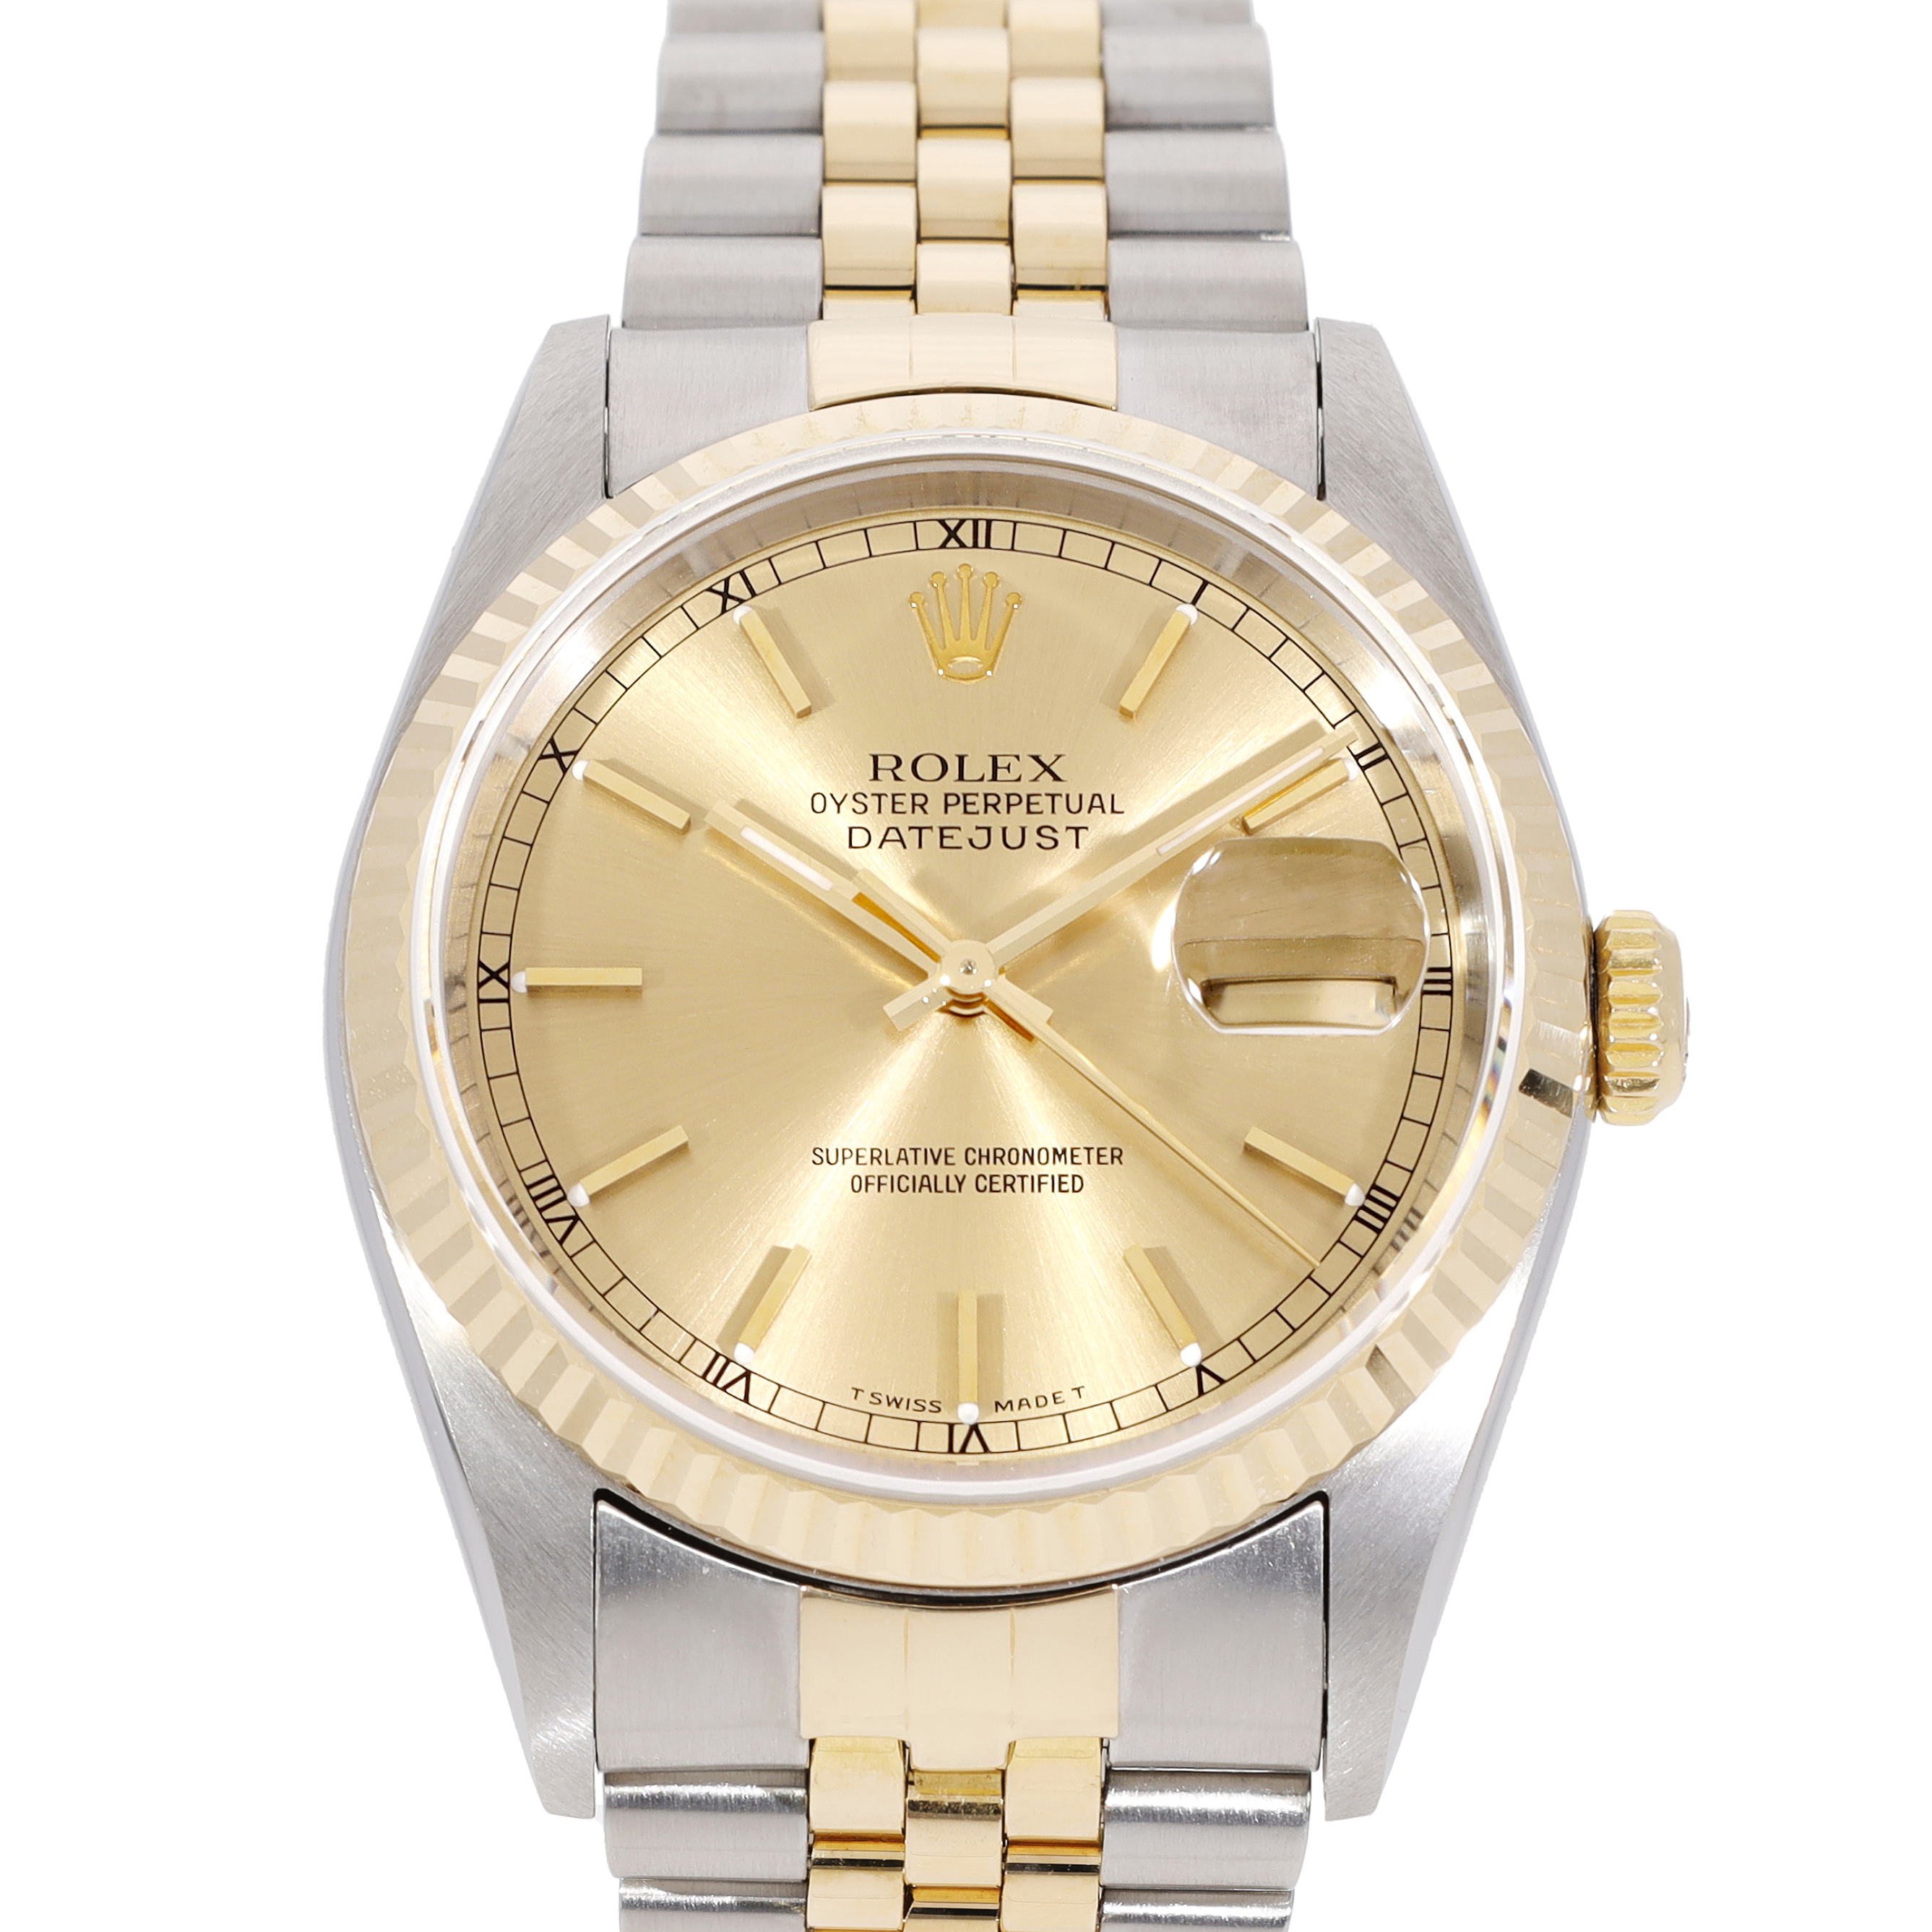 Buy Rolex watches, Certified Authenticity